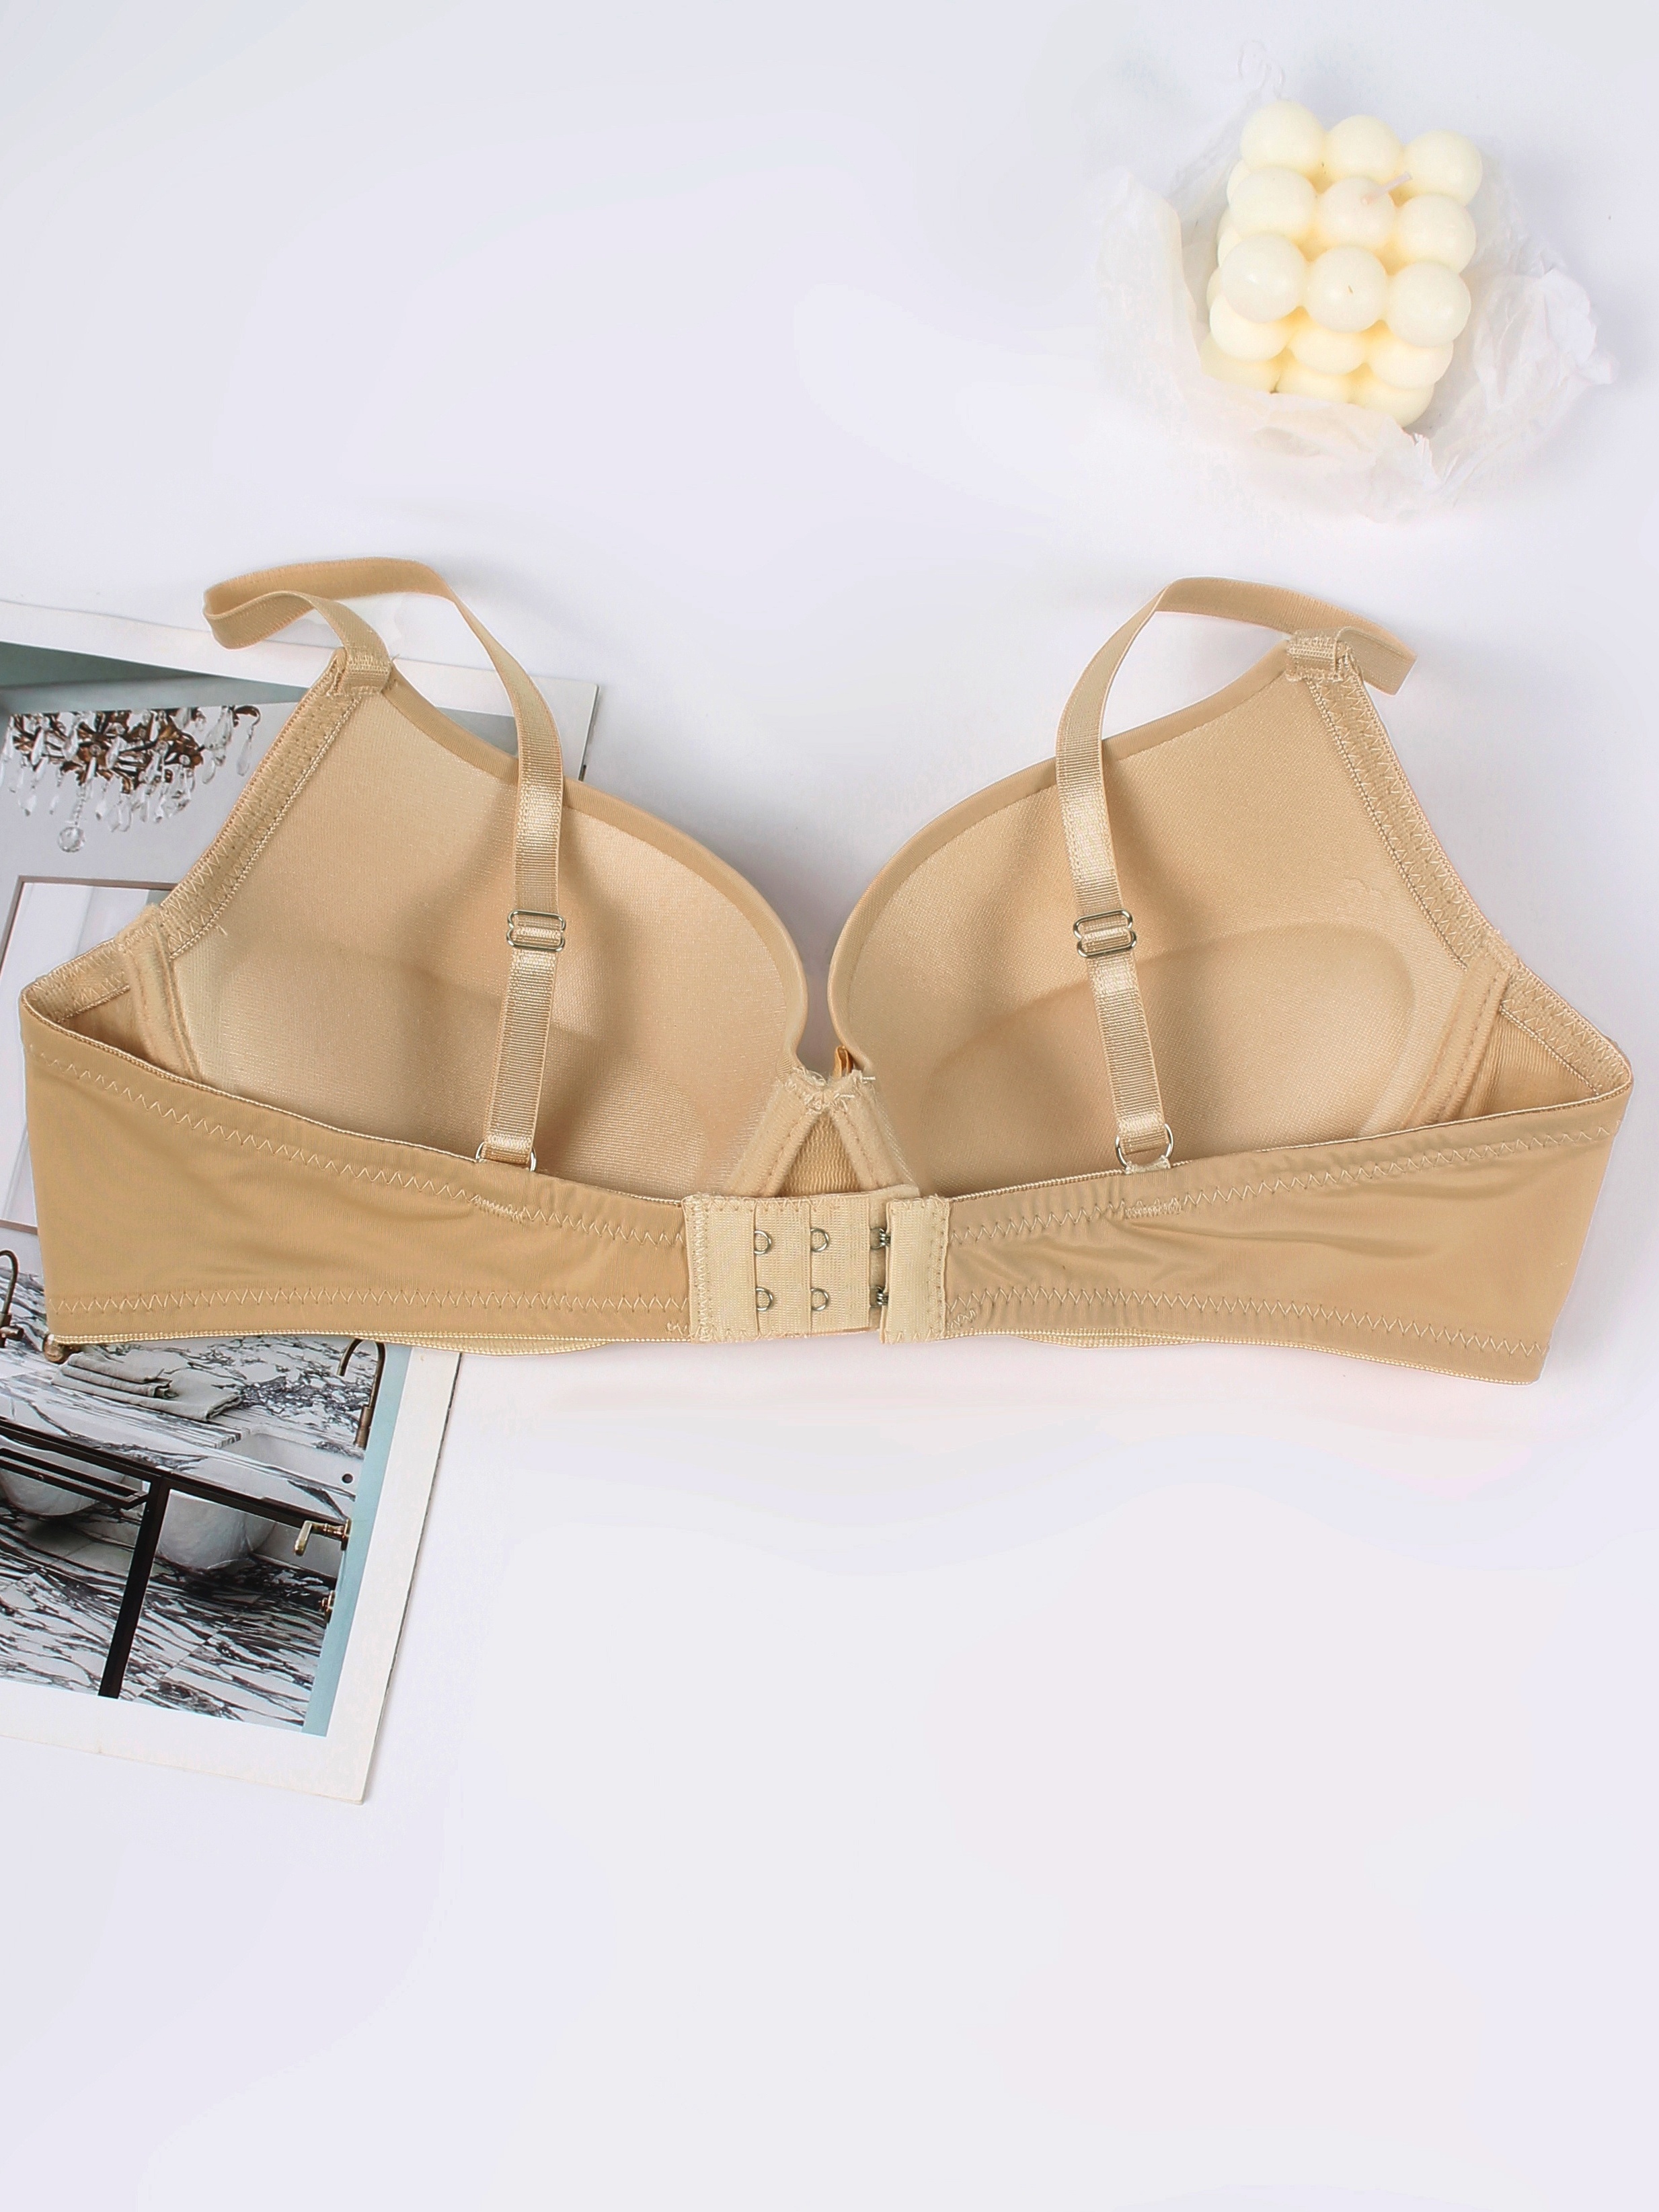 Coconut Creek - New Tilley Comfort Underwear and Travel Bra! Silky stretch  fabric for smooth contouring and maximum comfort. Ultimate comfort for  travel, easy care and fast drying. Comes in a reusable